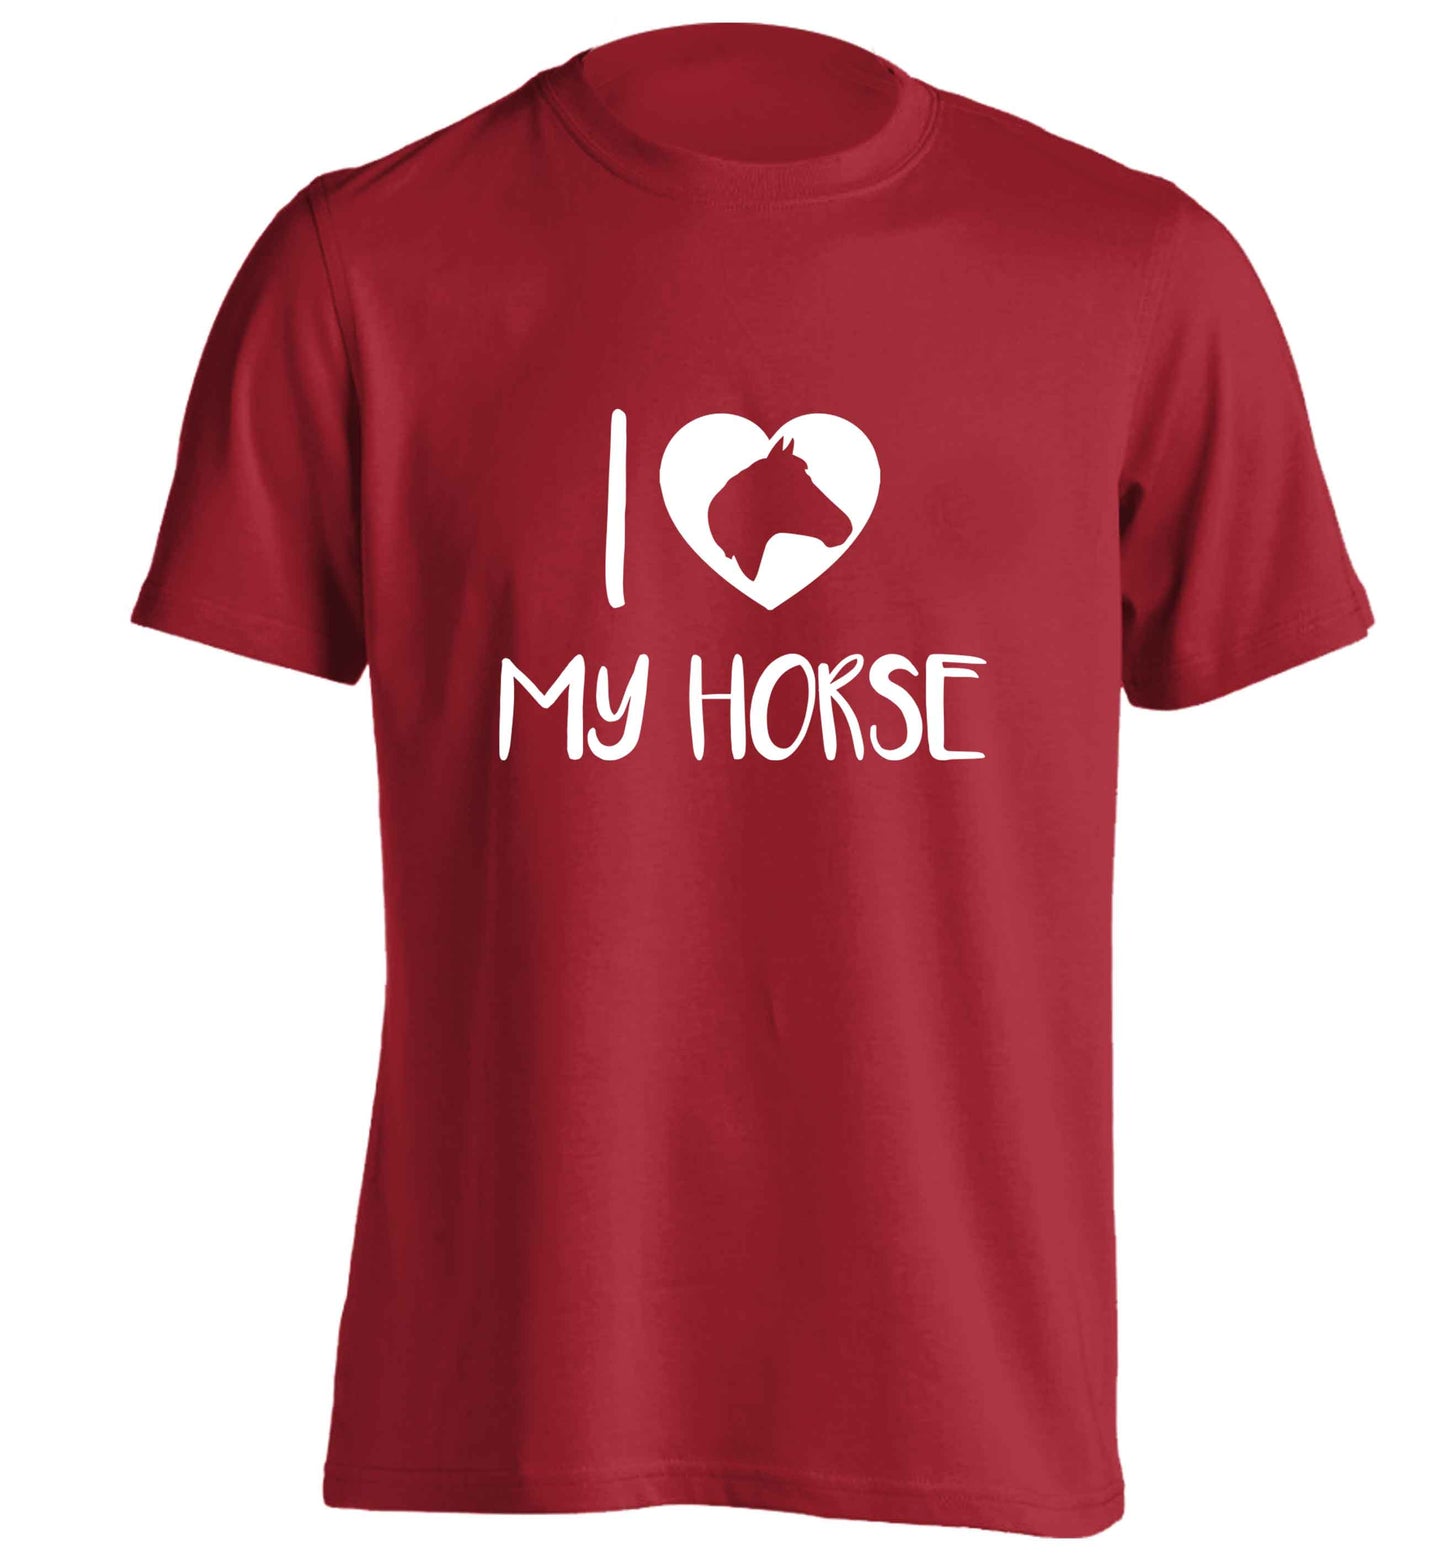 I love my horse adults unisex red Tshirt 2XL